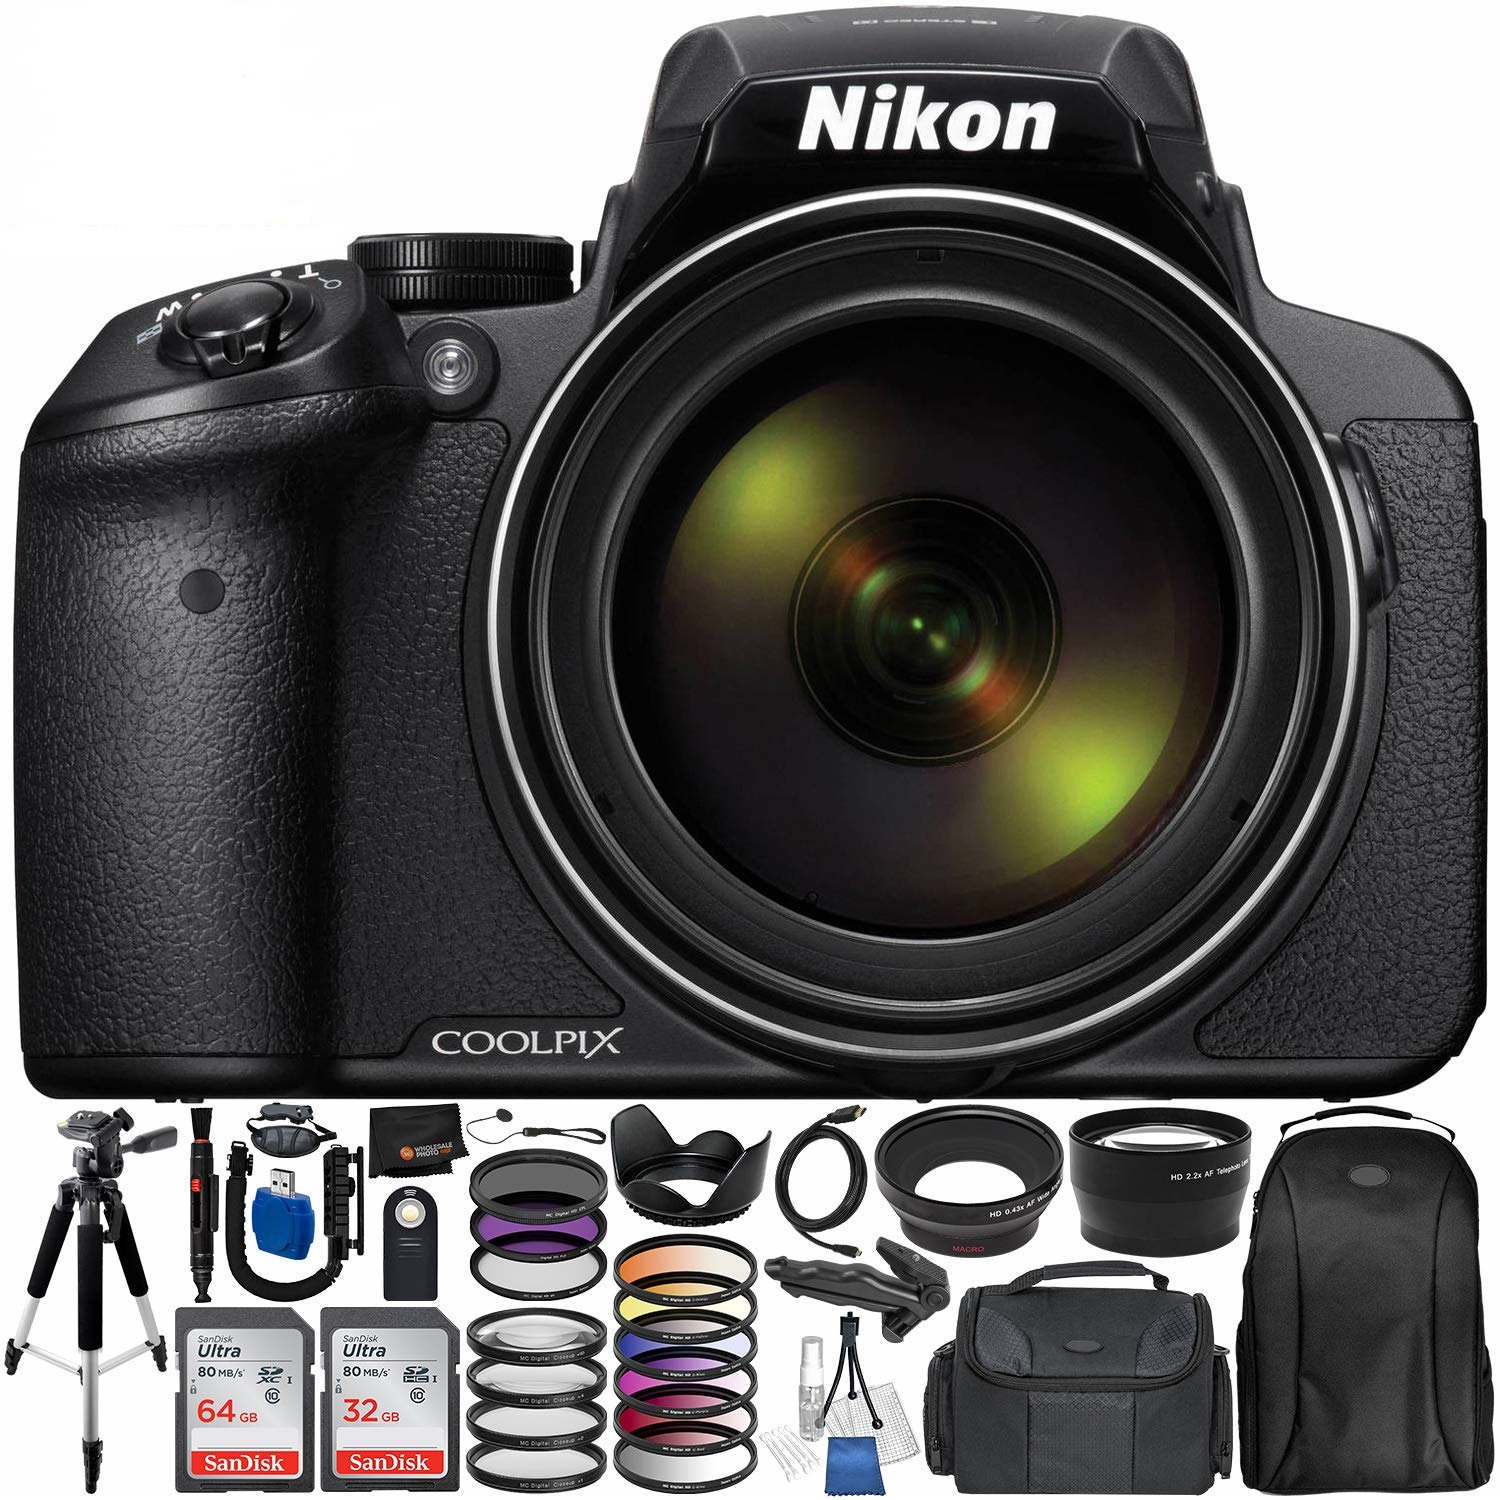 Nikon COOLPIX P900 Digital Camera with 83x Optical Zoom and Built-In Wi-Fi (Black) + Ultimate 96GB Accessory Kit